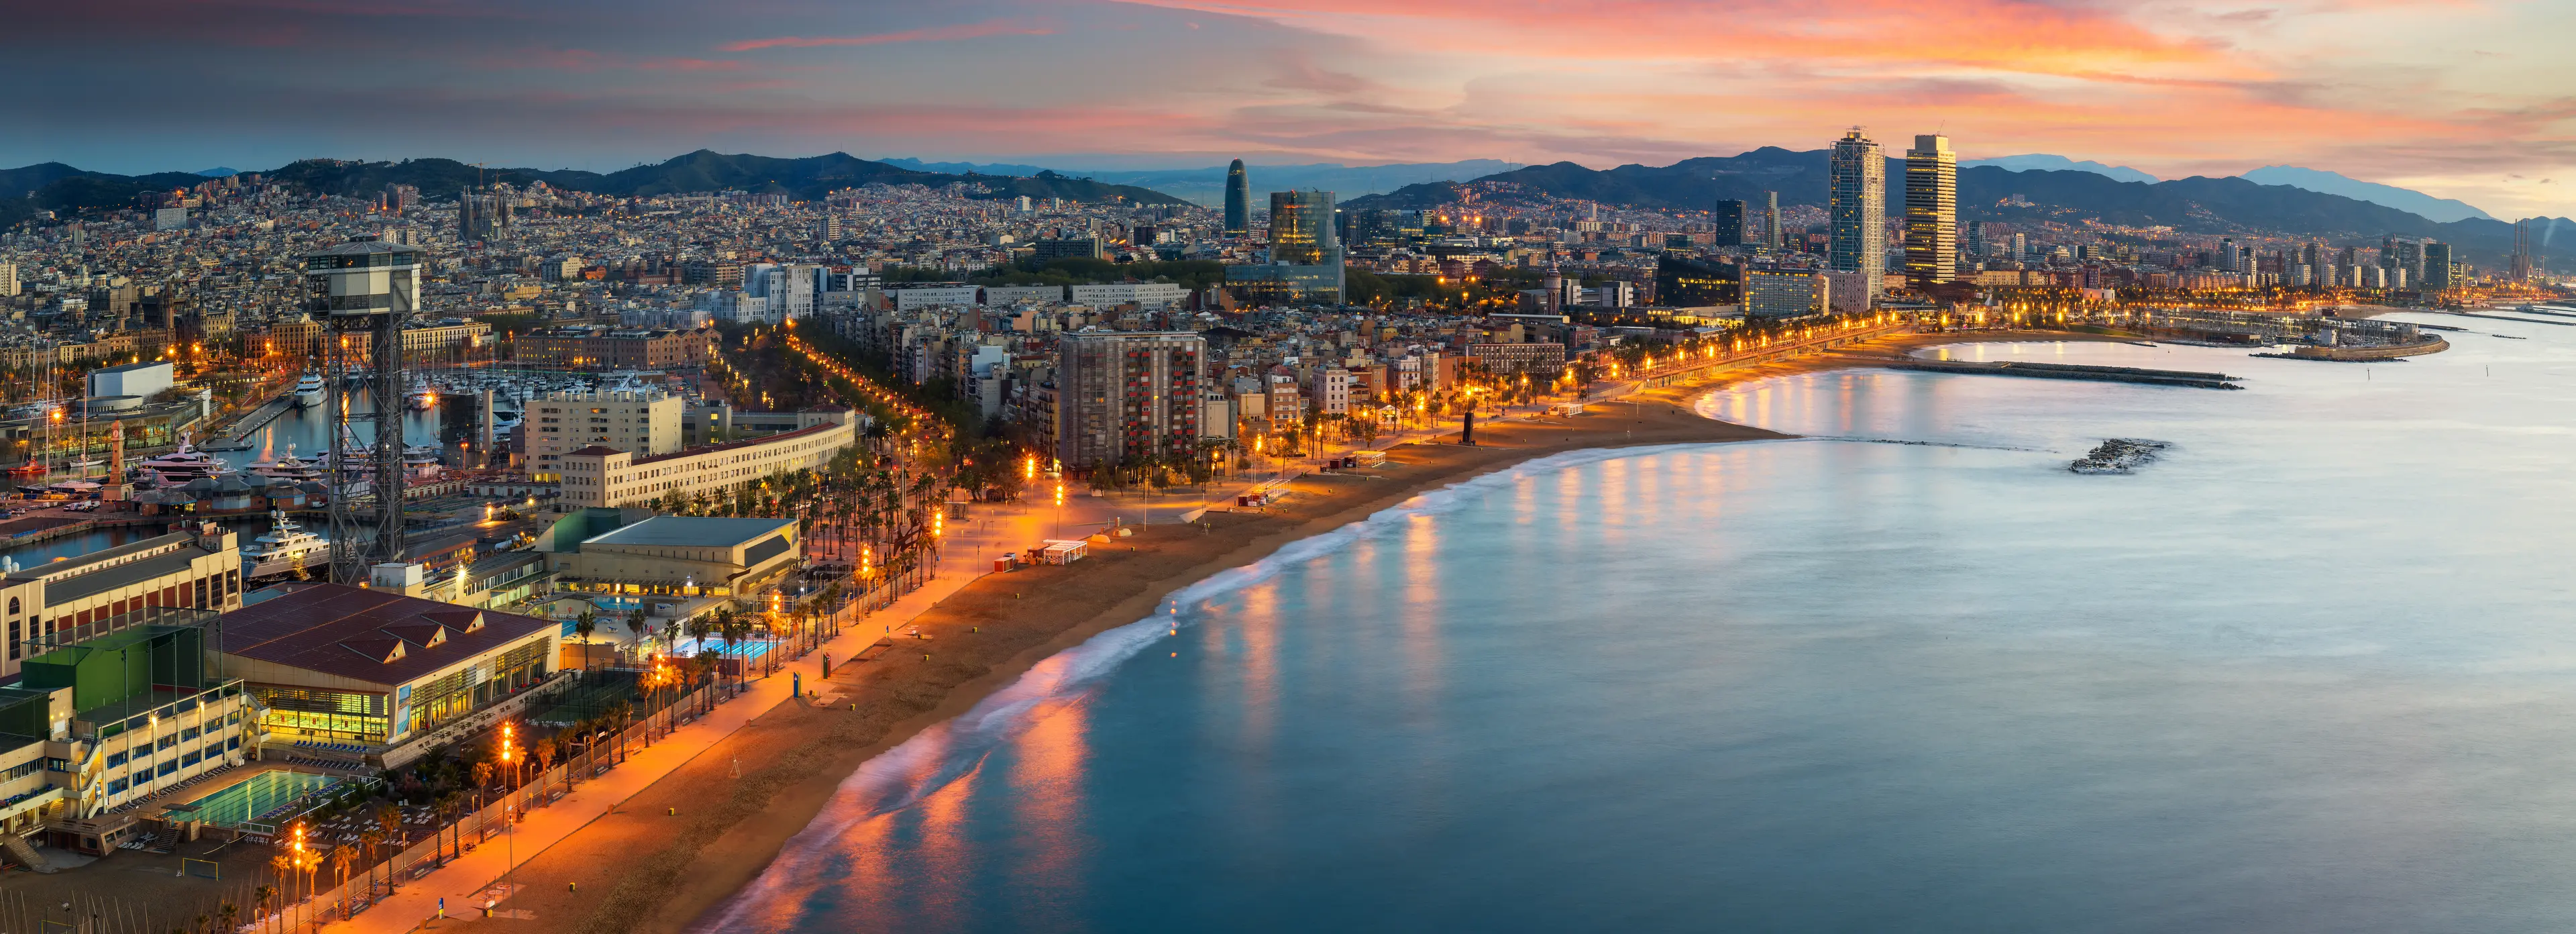 3-Day Local Experience Family Itinerary: Sightseeing & Relaxation in Barcelona